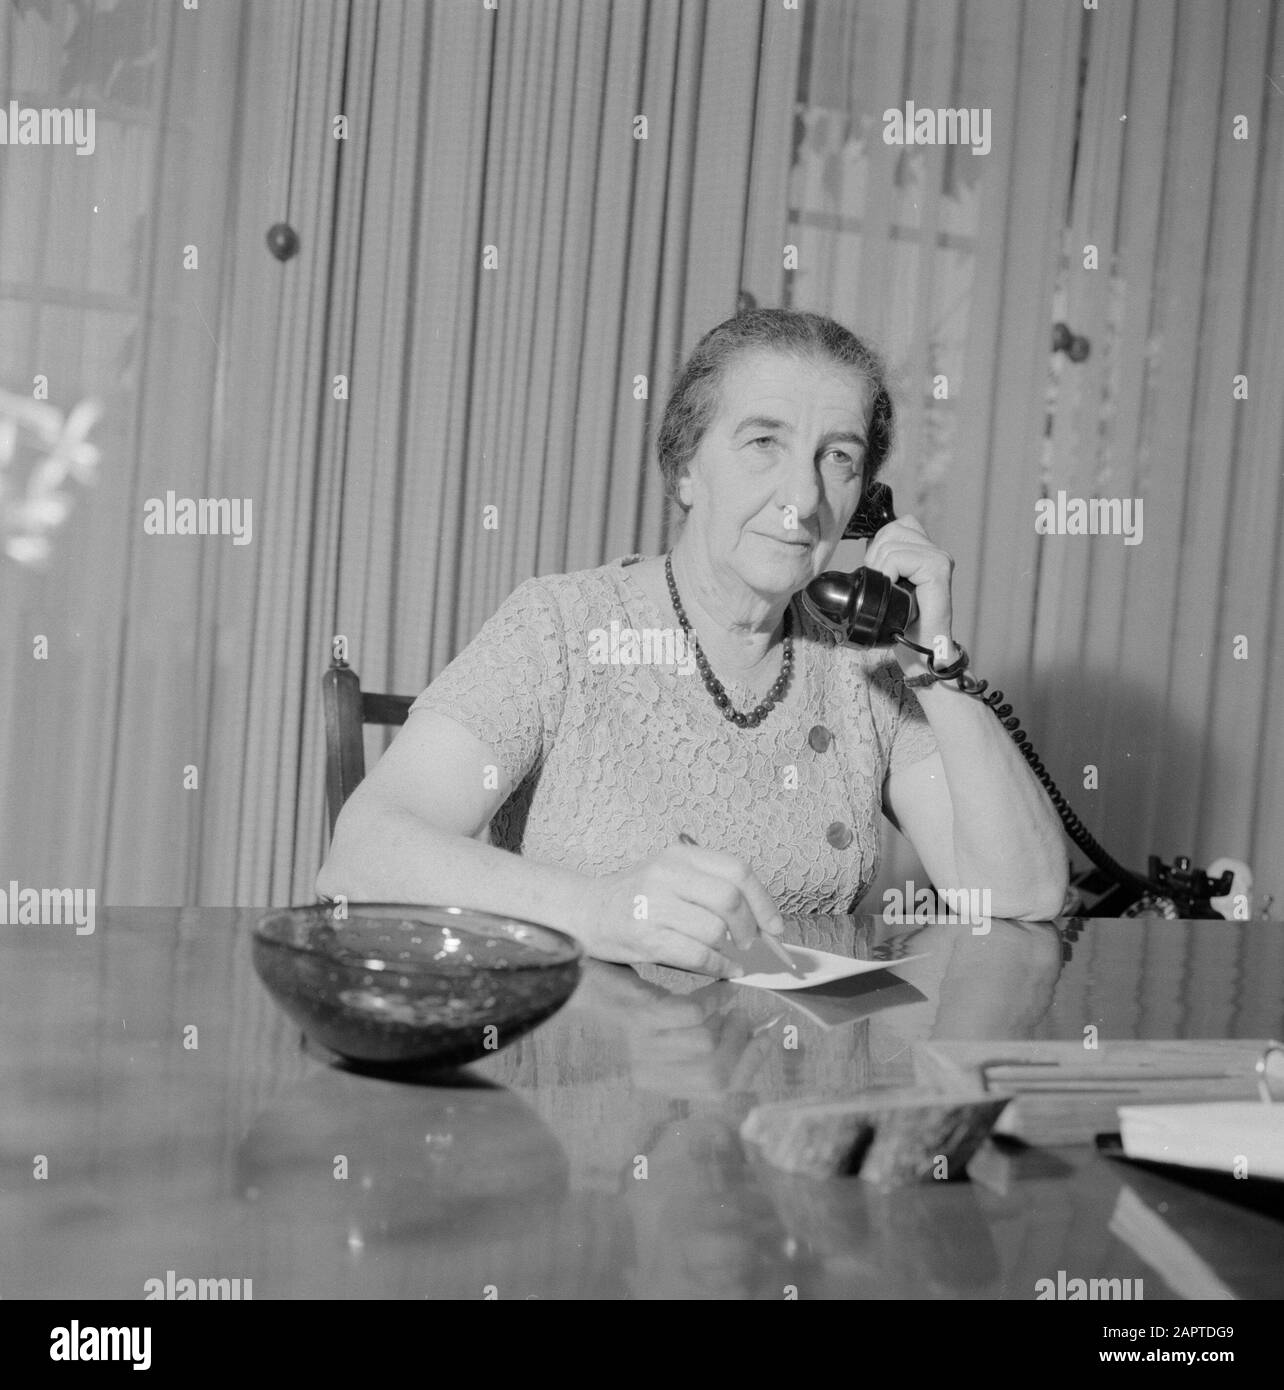 Golda Meir, Minister of Foreign Affairs of Israel while she calls Date: January 1, 1964 Location: Israel Keywords: ministers, portraits, telephones Personal name: Meir, Golda Stock Photo